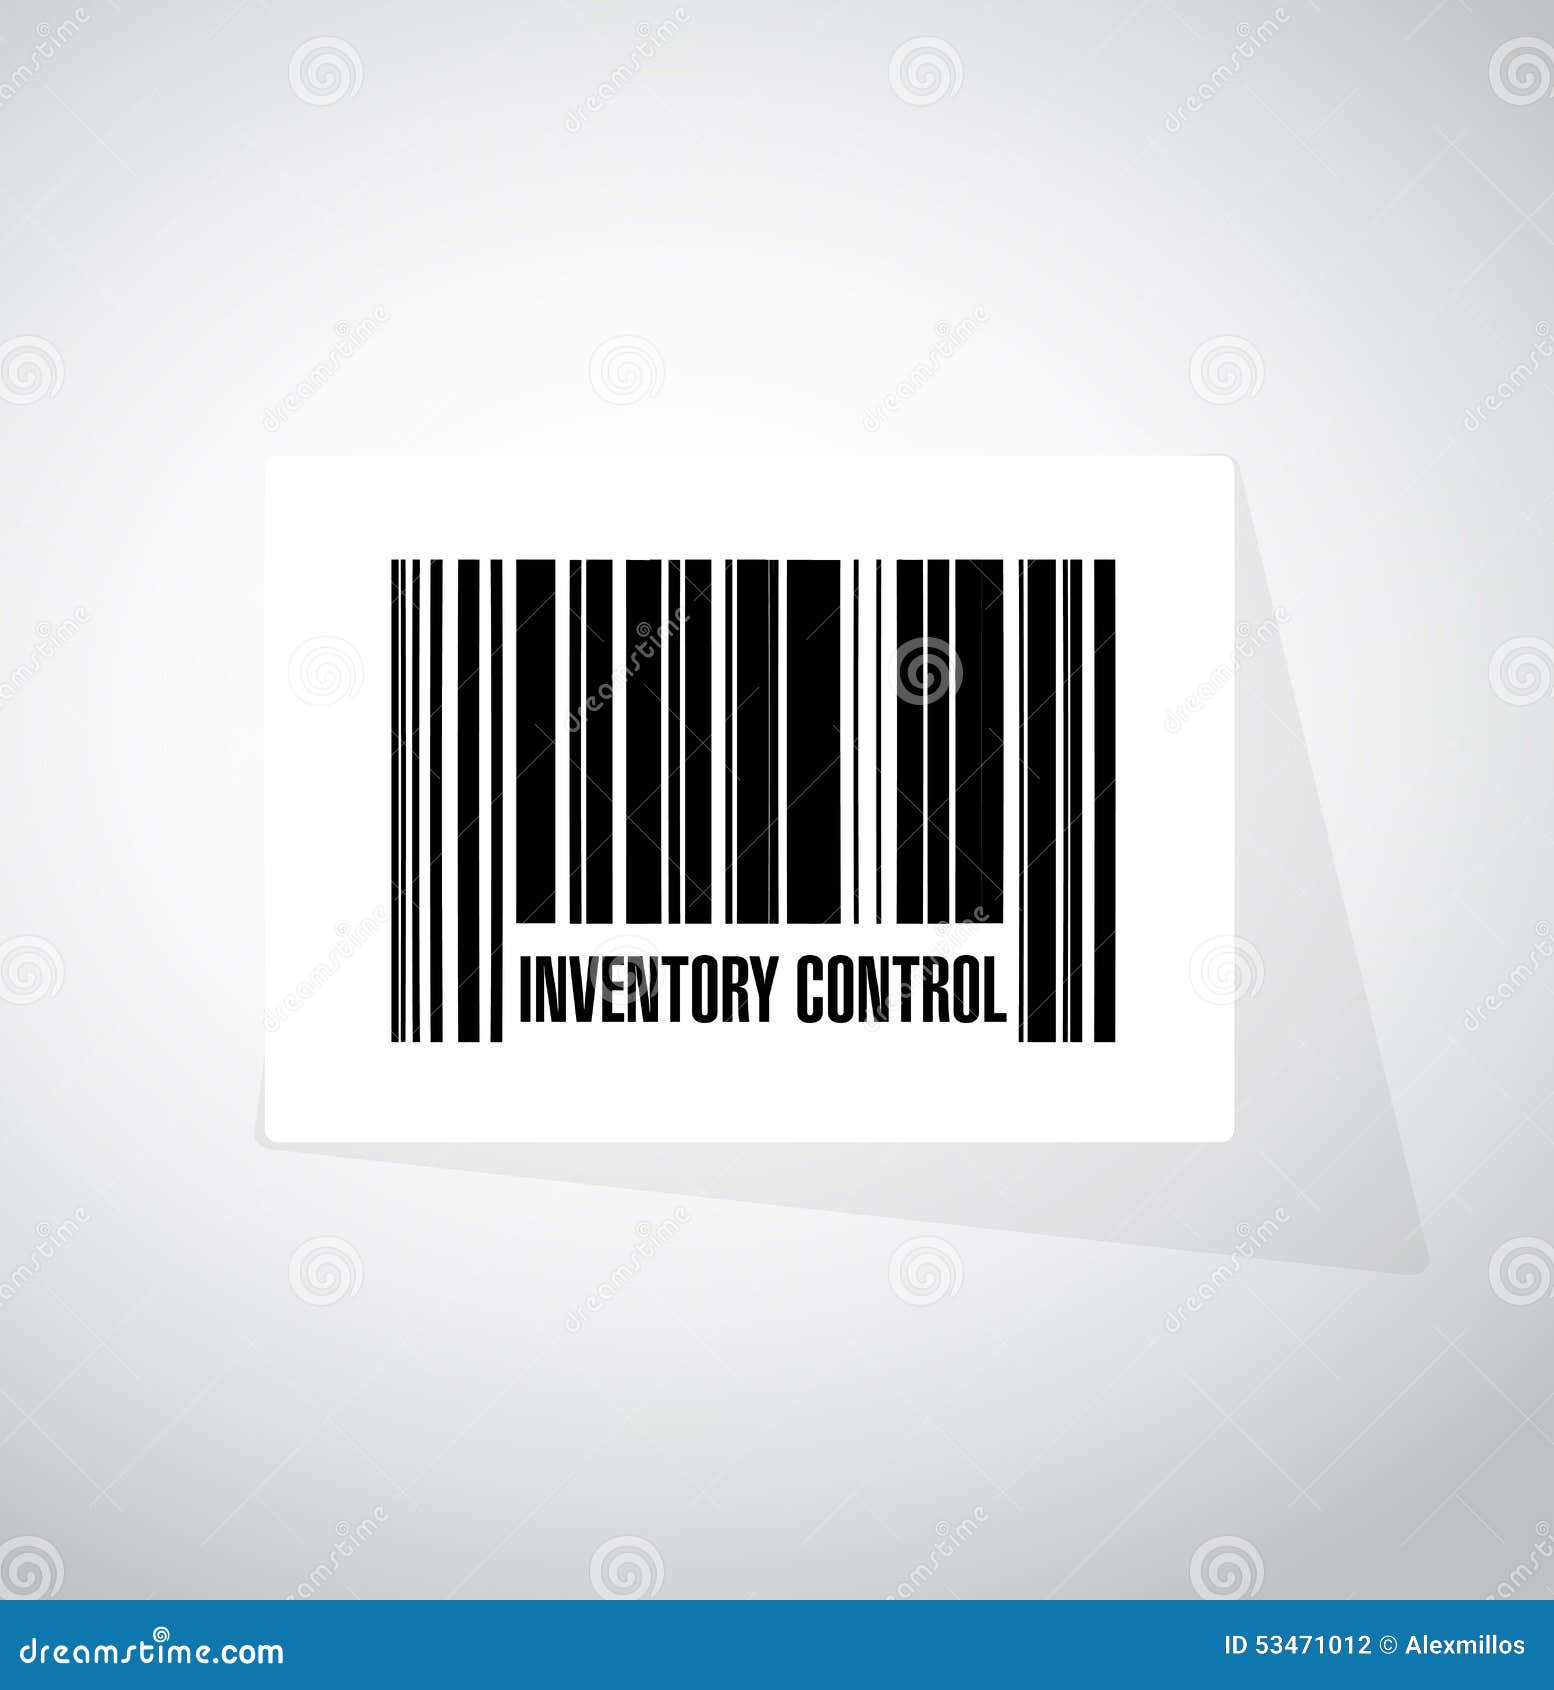 inventory control upc code sign concept